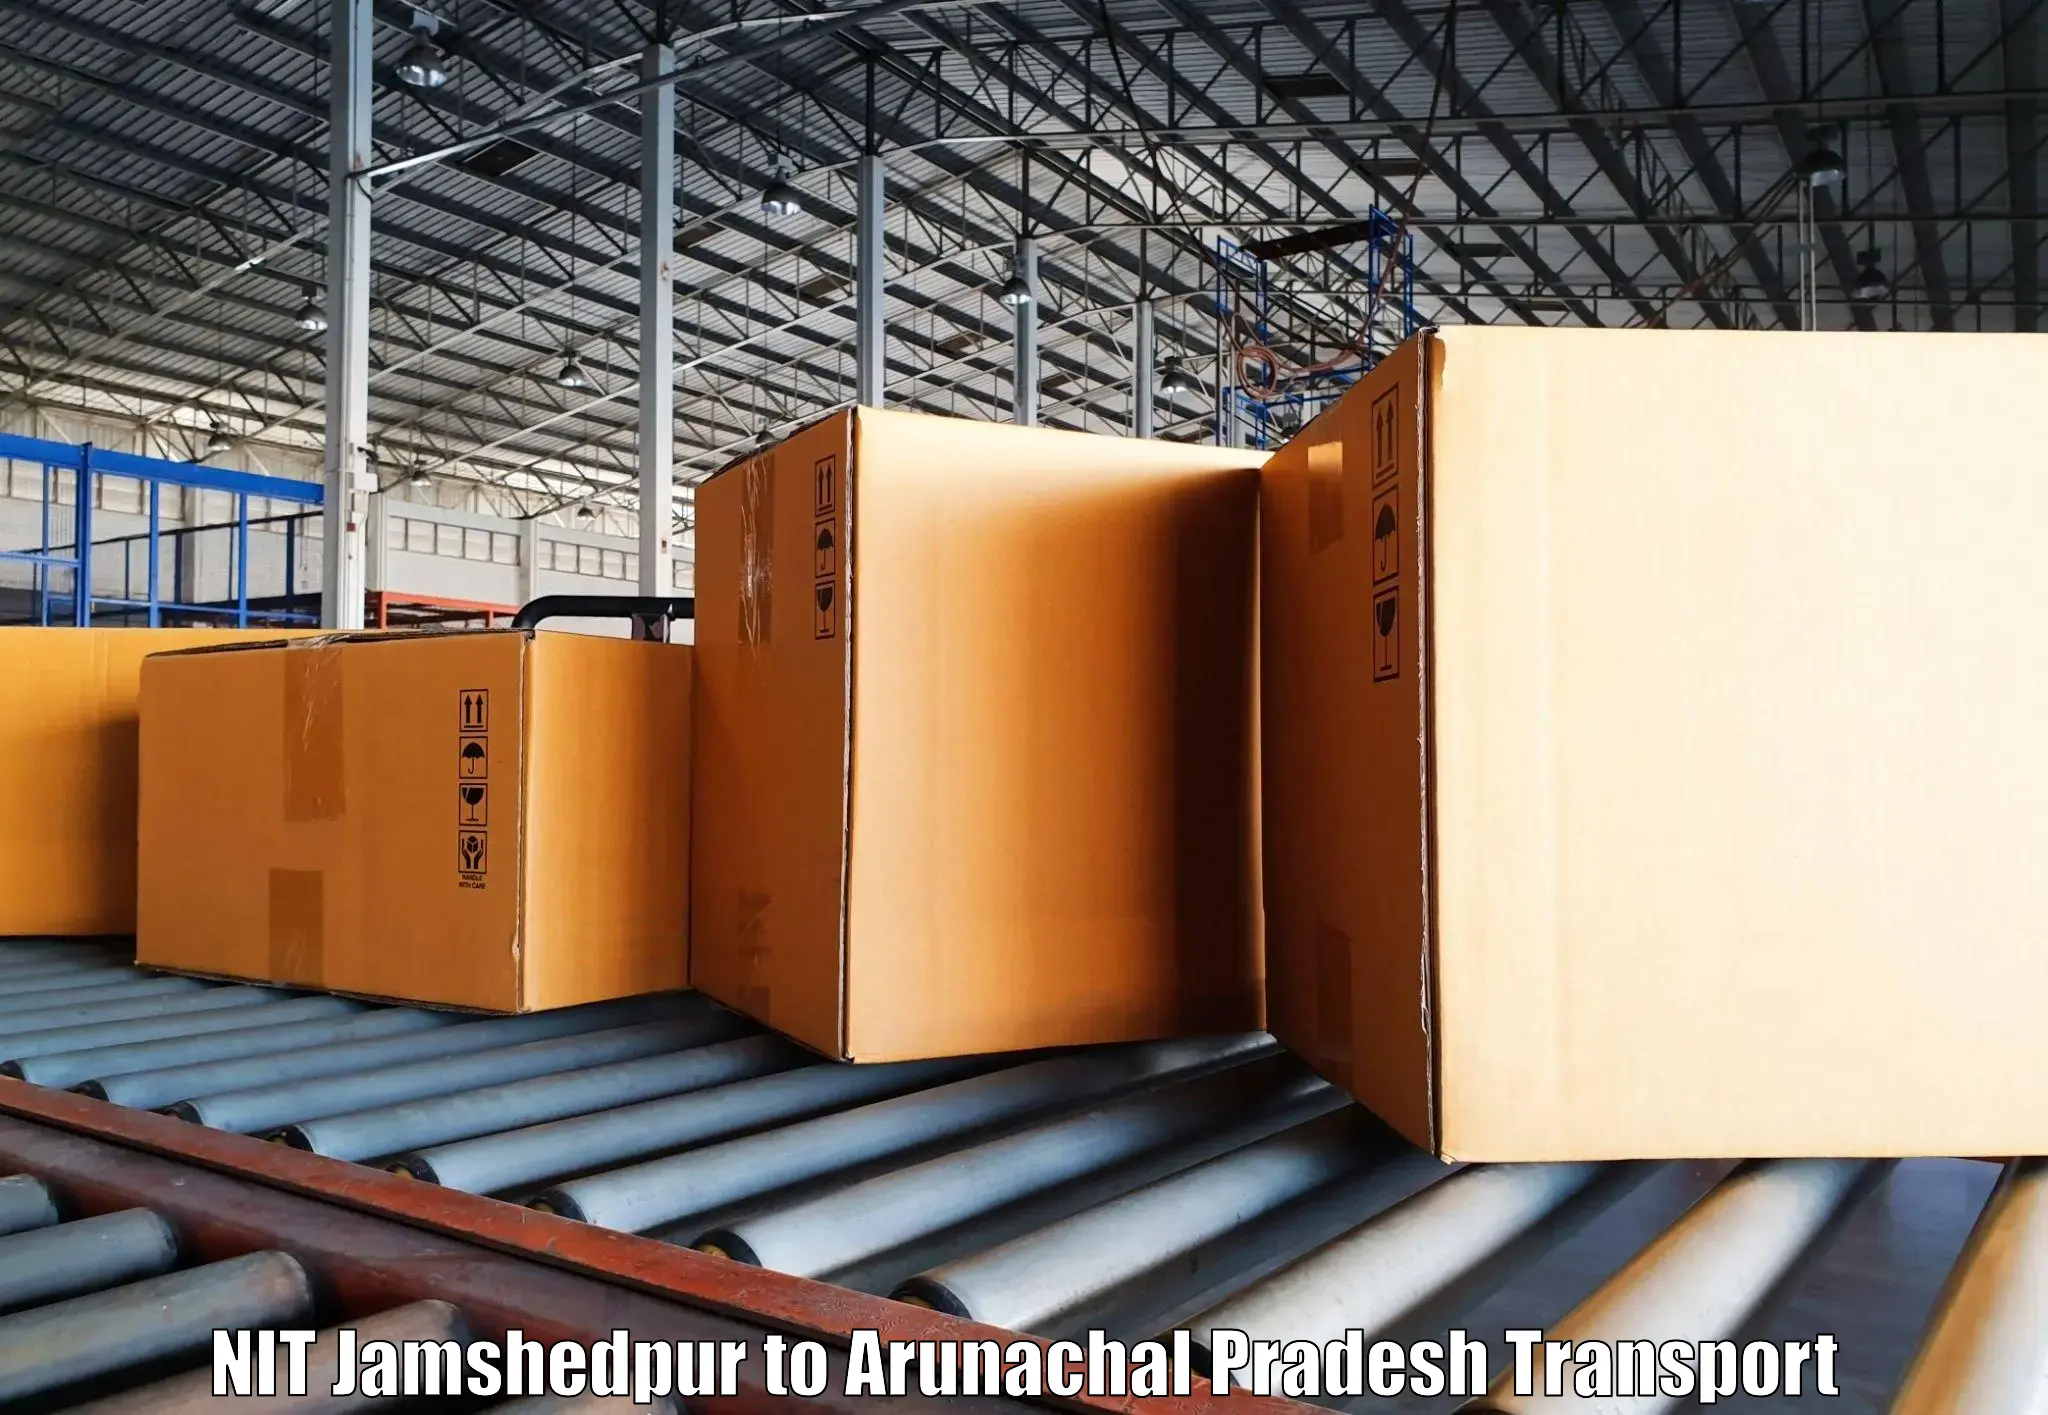 Luggage transport services NIT Jamshedpur to Lohit